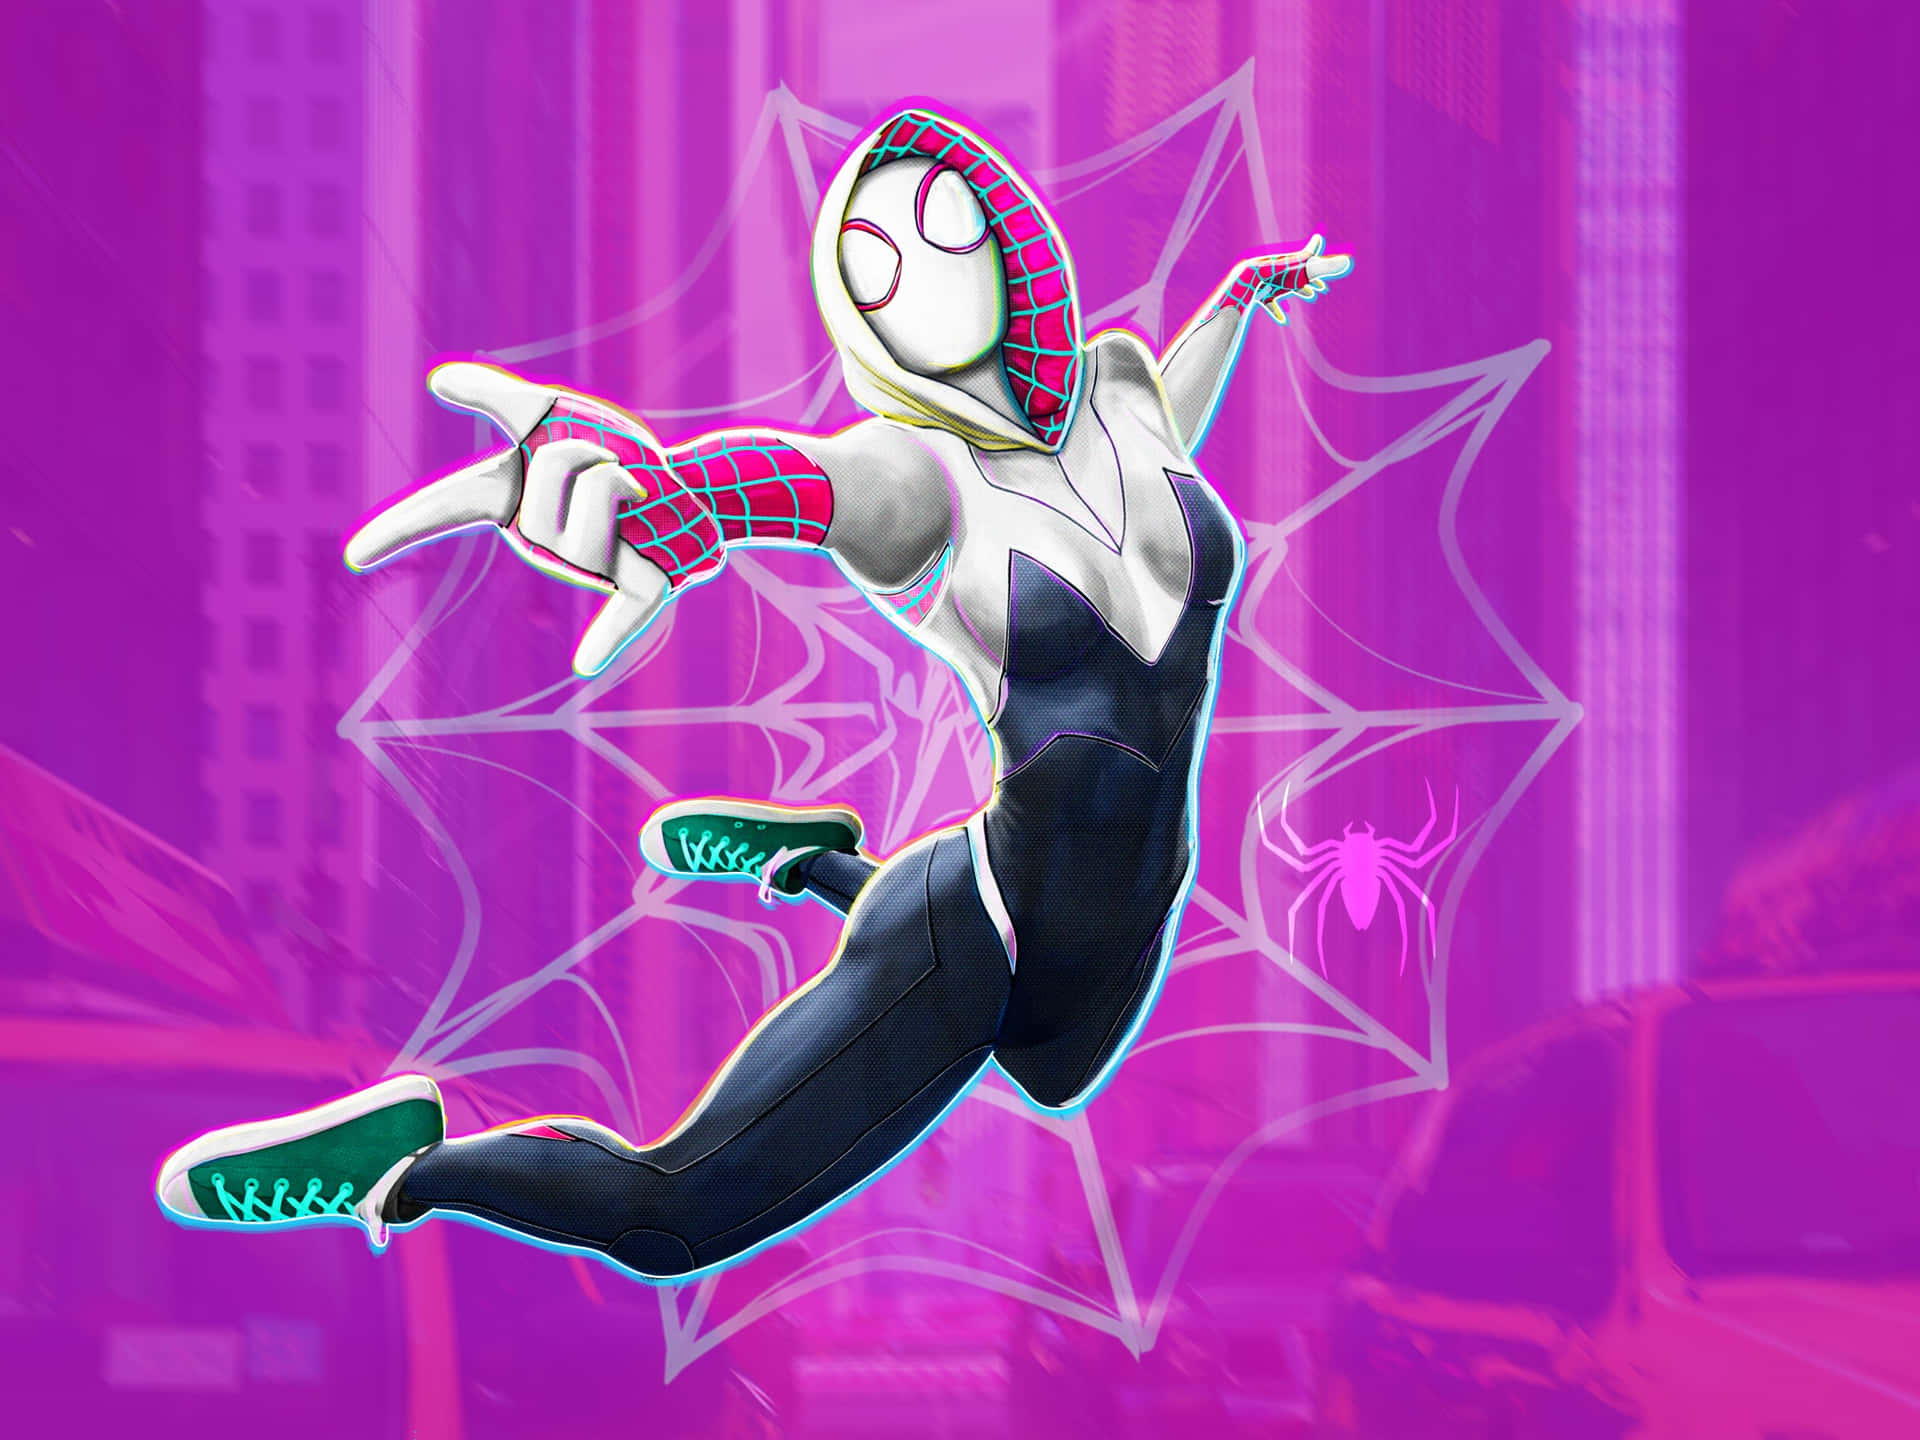 Spider Gwen, the powerful first lady of the Marvel Universe